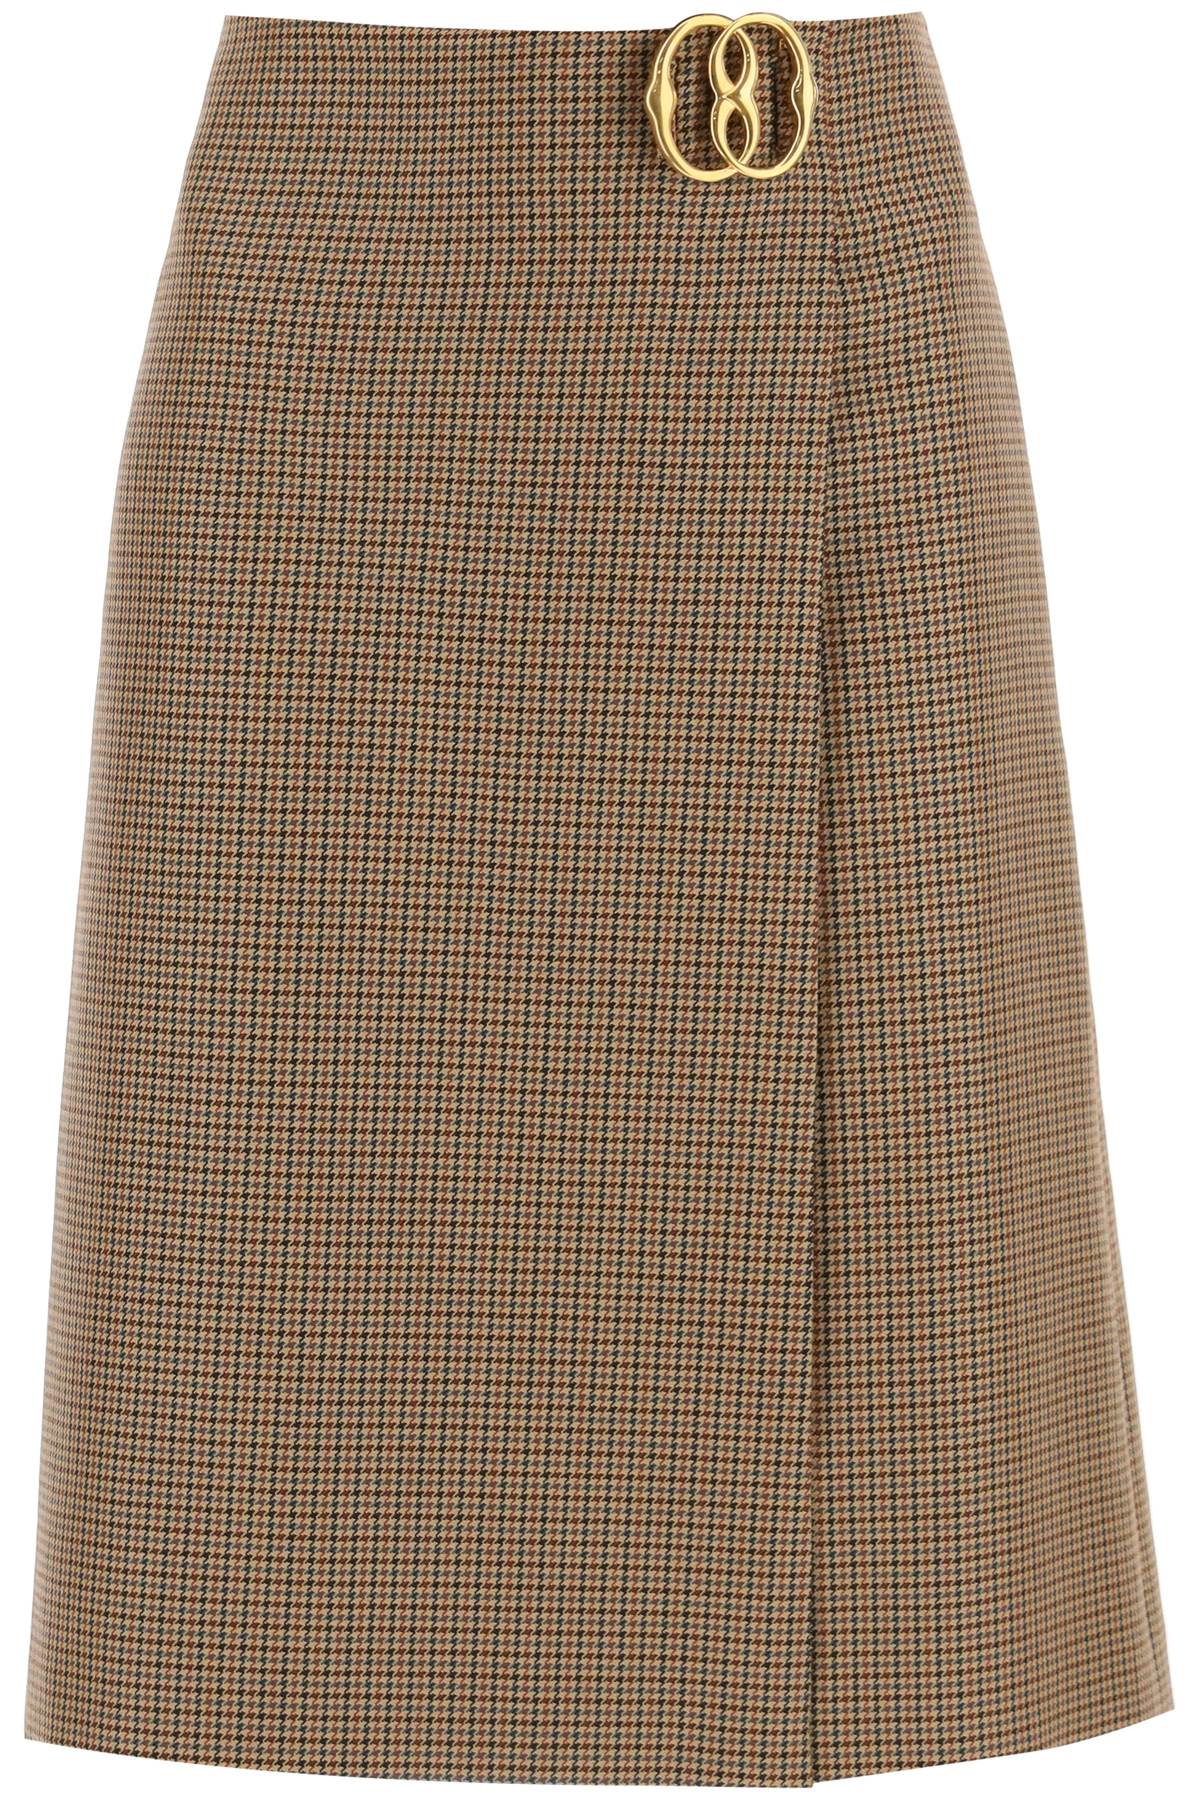 Bally houndstooth a-line skirt with emblem buckle-0